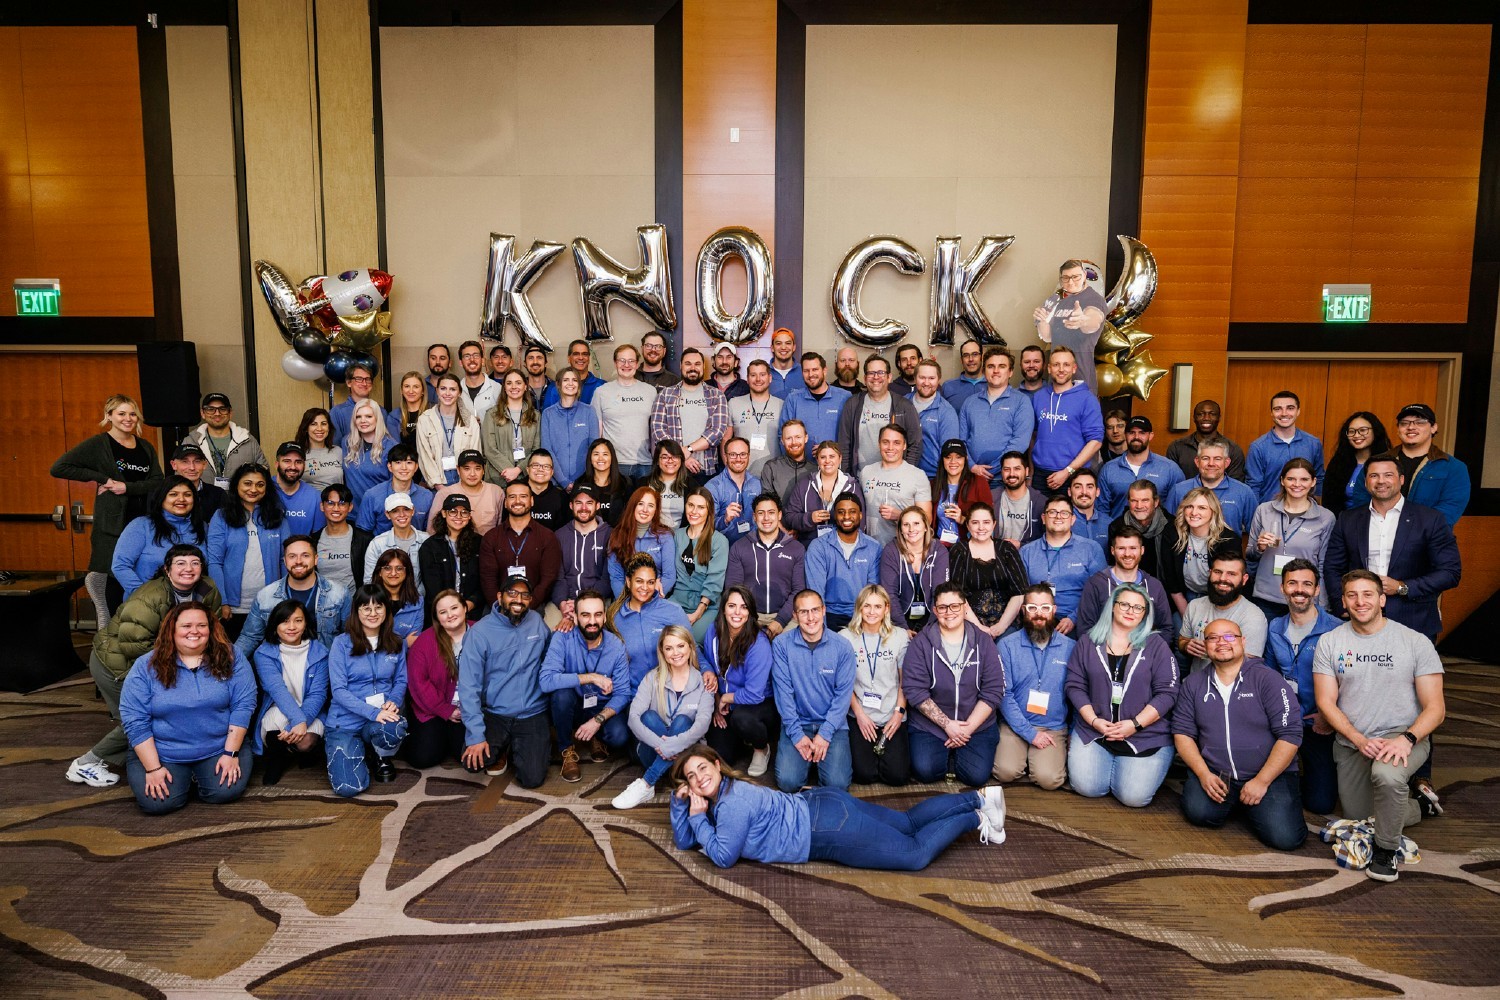 Group shot from our January 2022 Annual Kick Off